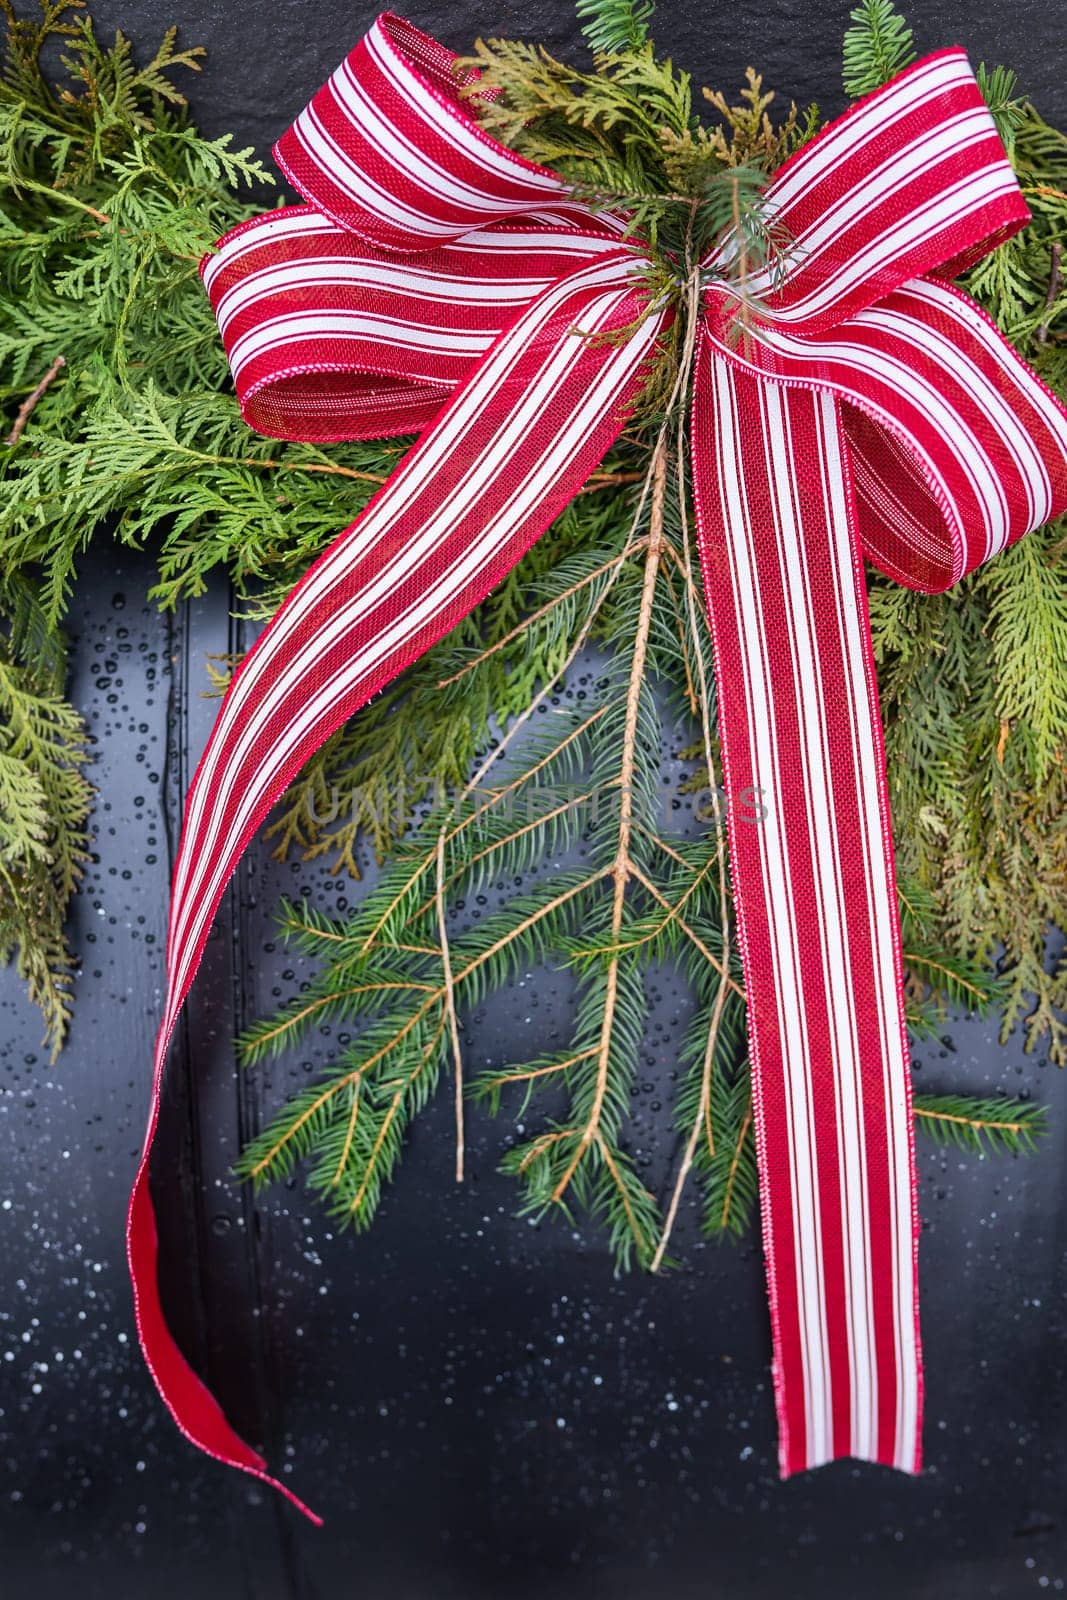 Red and white striped ribbon tied in a bow on a black background with greenery. Festive decoration on the street